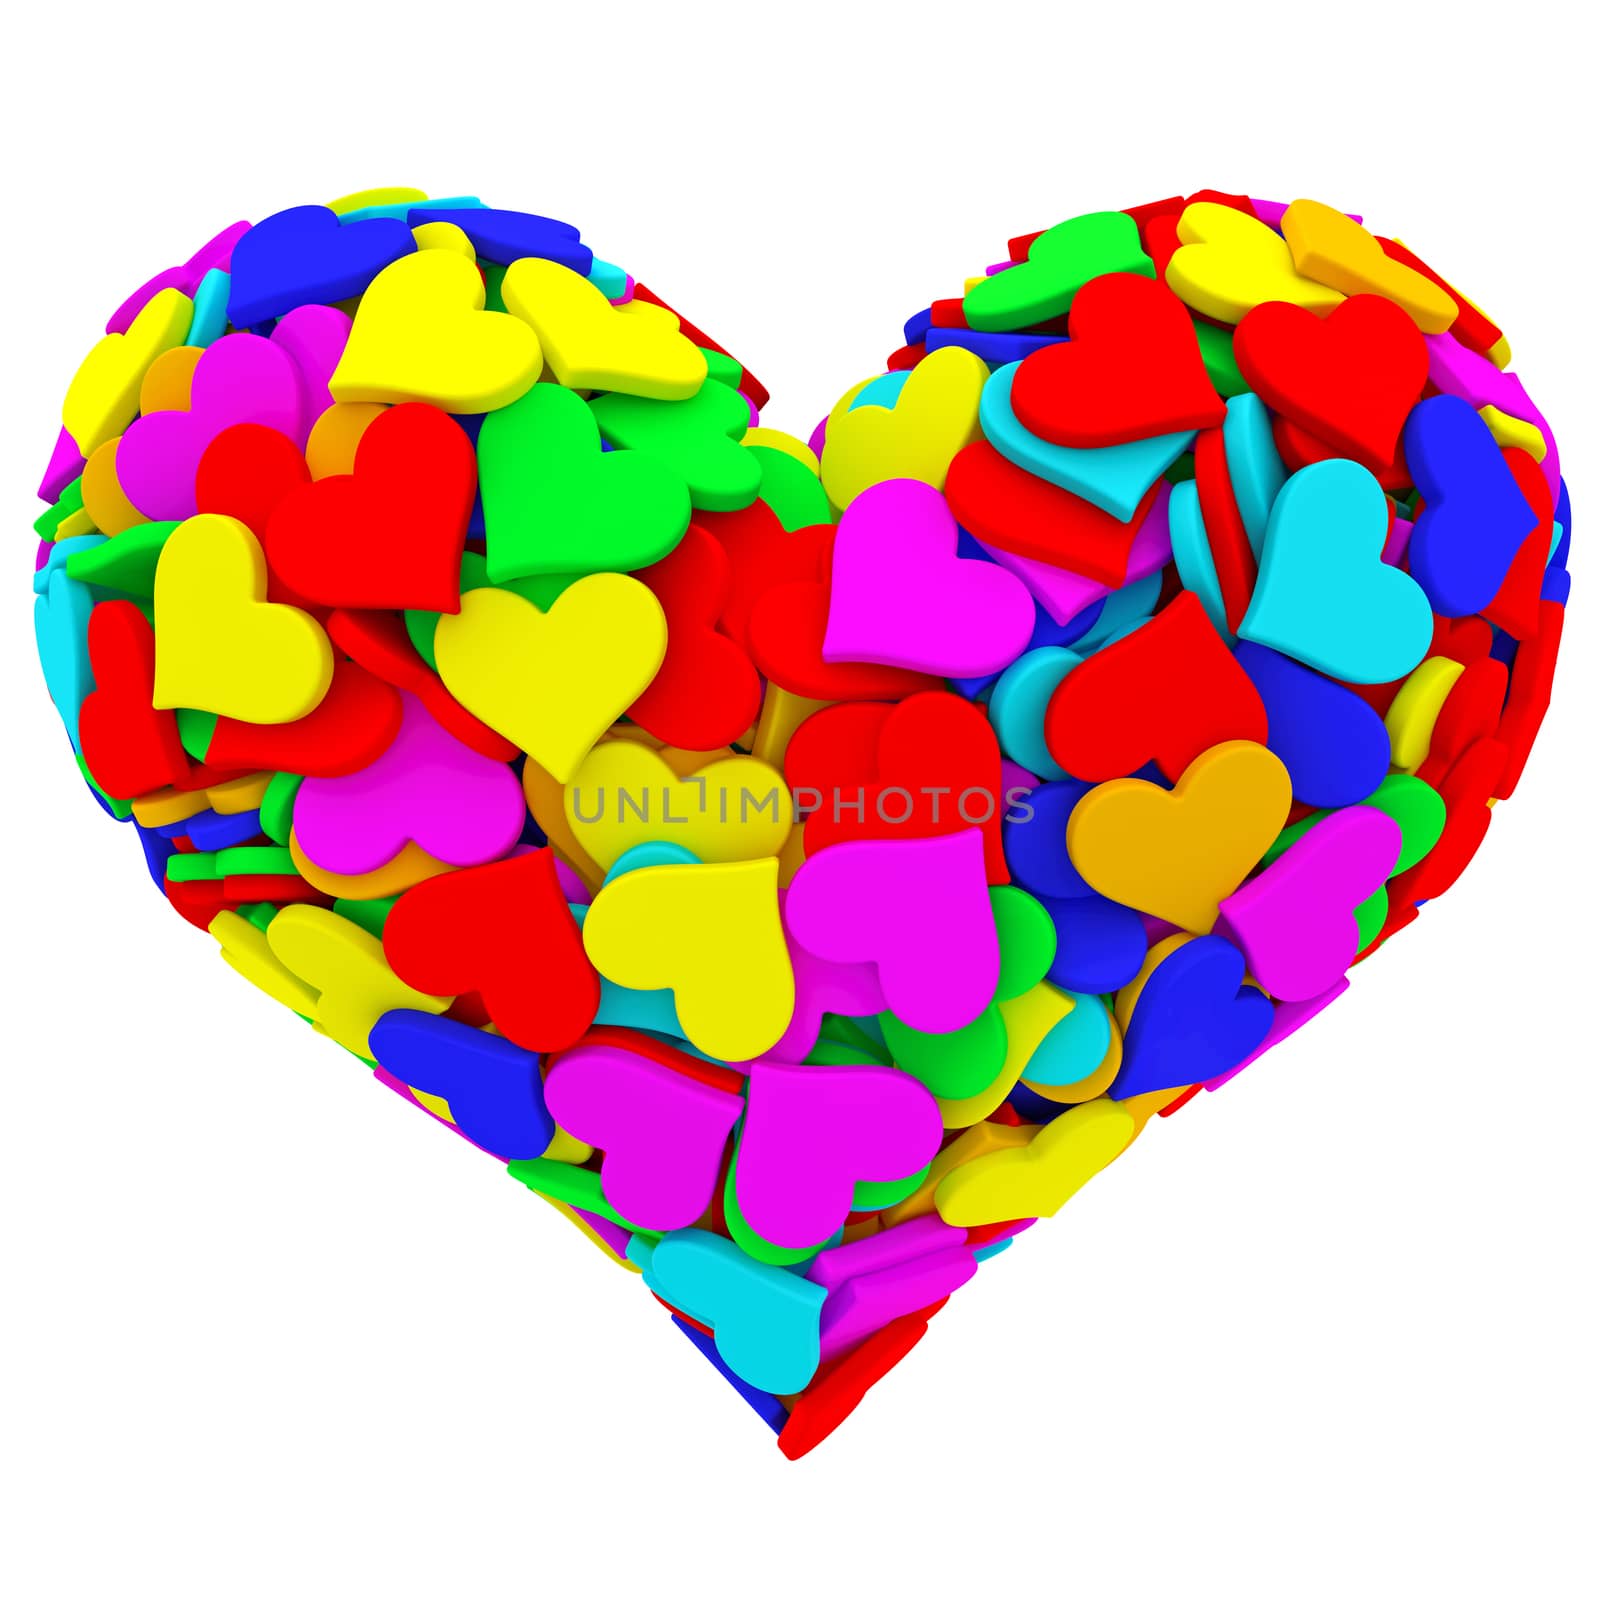 Heart shape composed of many colorful hearts isolated on white. High resolution 3D image